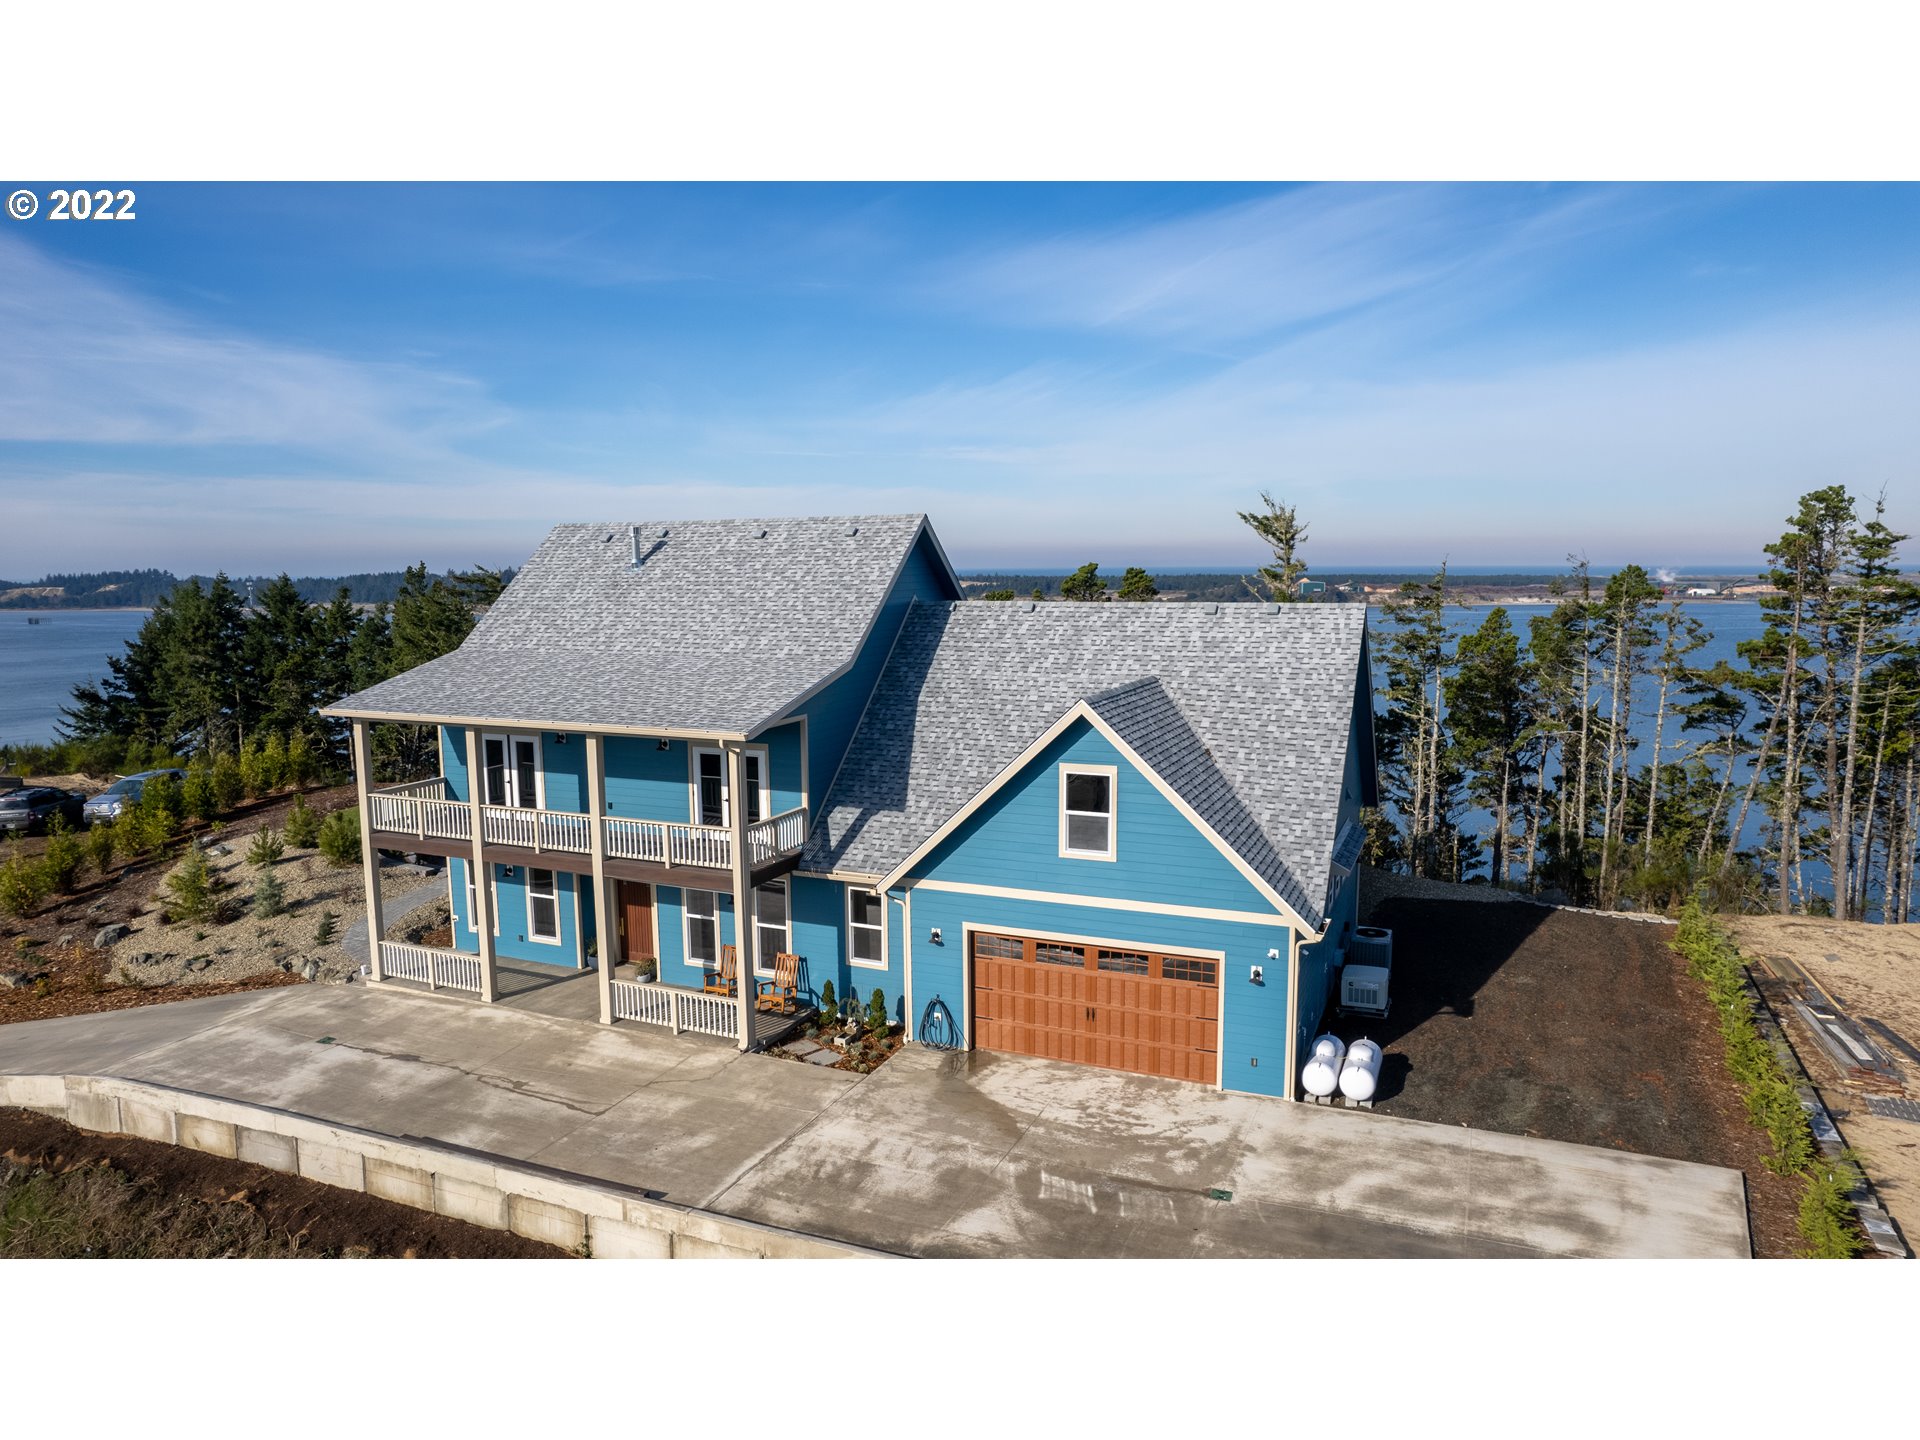 516 TAYLOR AVE, Coos Bay, OR 97420